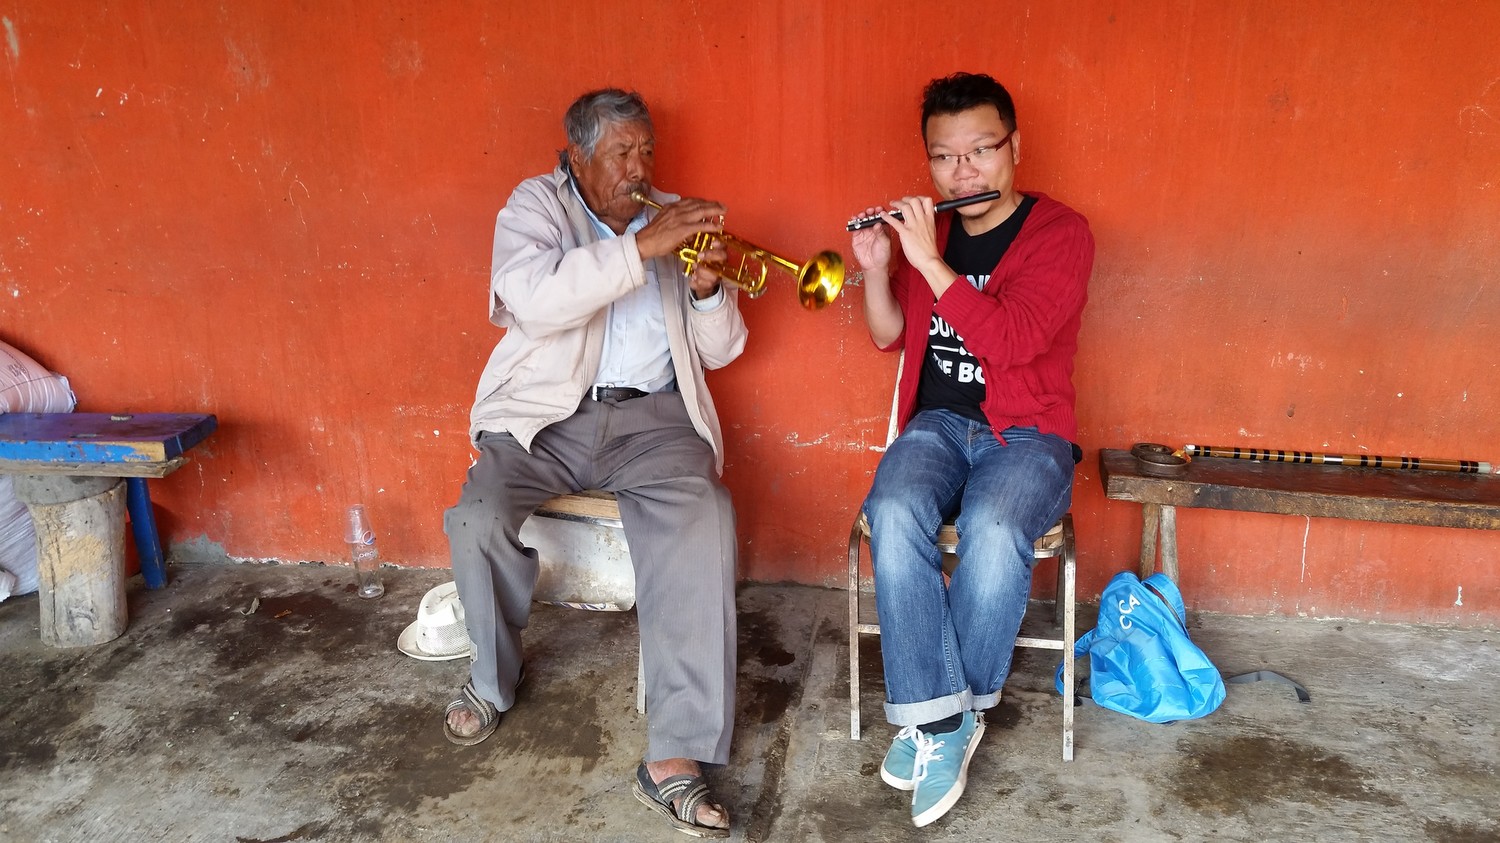 2016 artist-in-residence Dr. Hong Da Chin from Malaysia with local Coapan musician Miguel Teles. IMAGE CREDIT: Rasquache Artist Residency